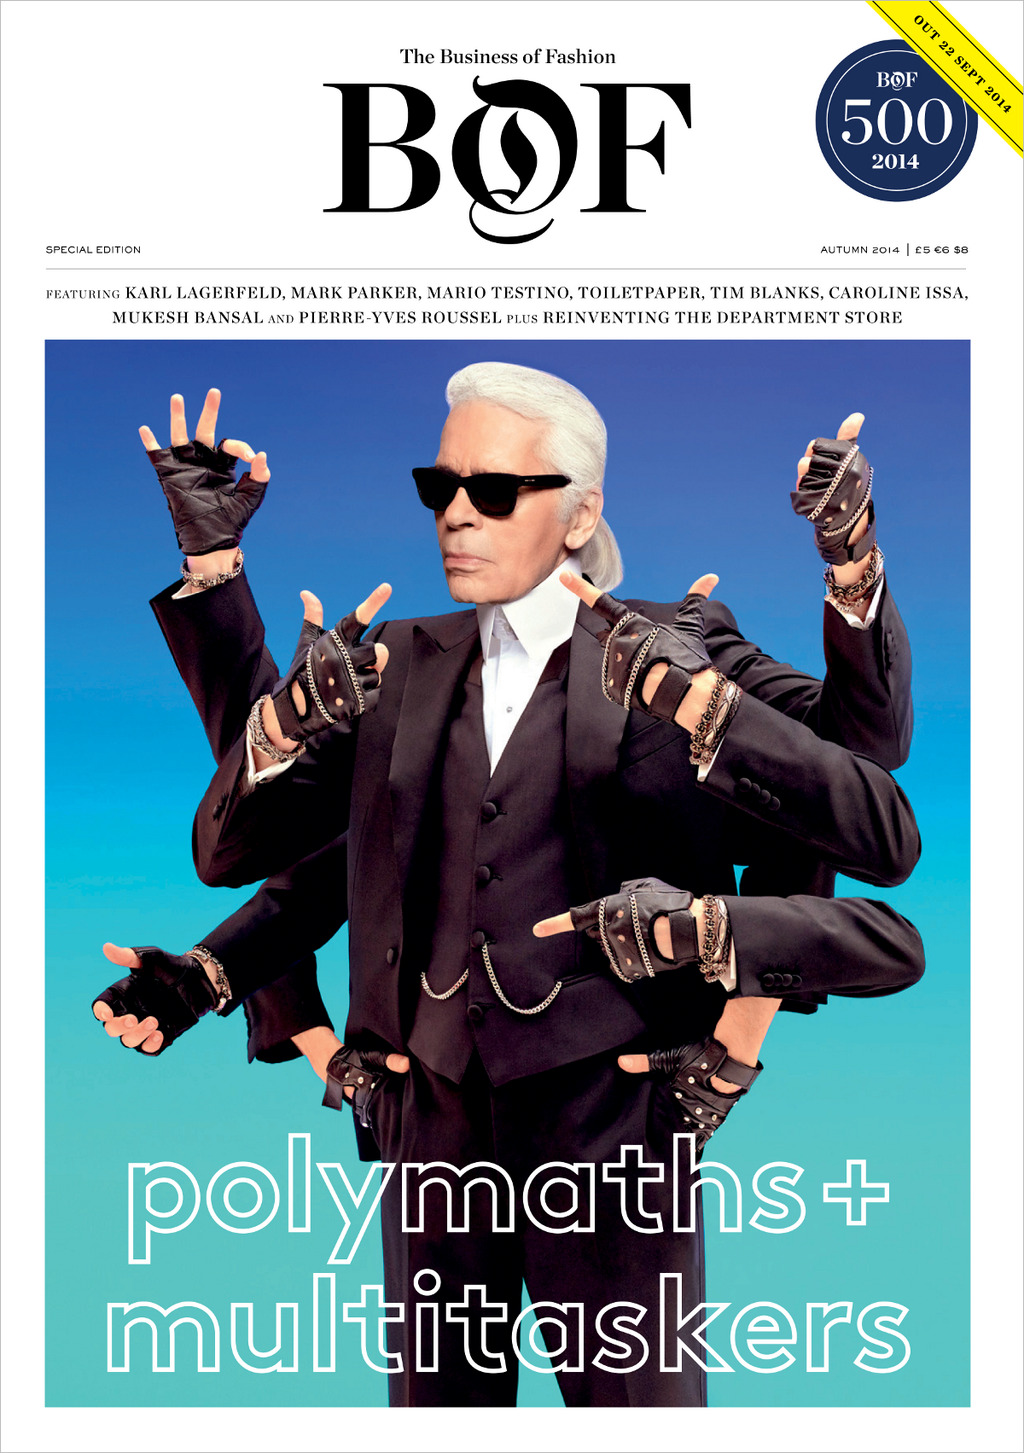 The Business of Fashion is proud to release ‘Polymaths & Multitaskers,’ a special print edition with in-depth features on several multi-talented, multi-faceted members of the BoF 500 community, including legendary designer Karl Lagerfeld, esteemed...